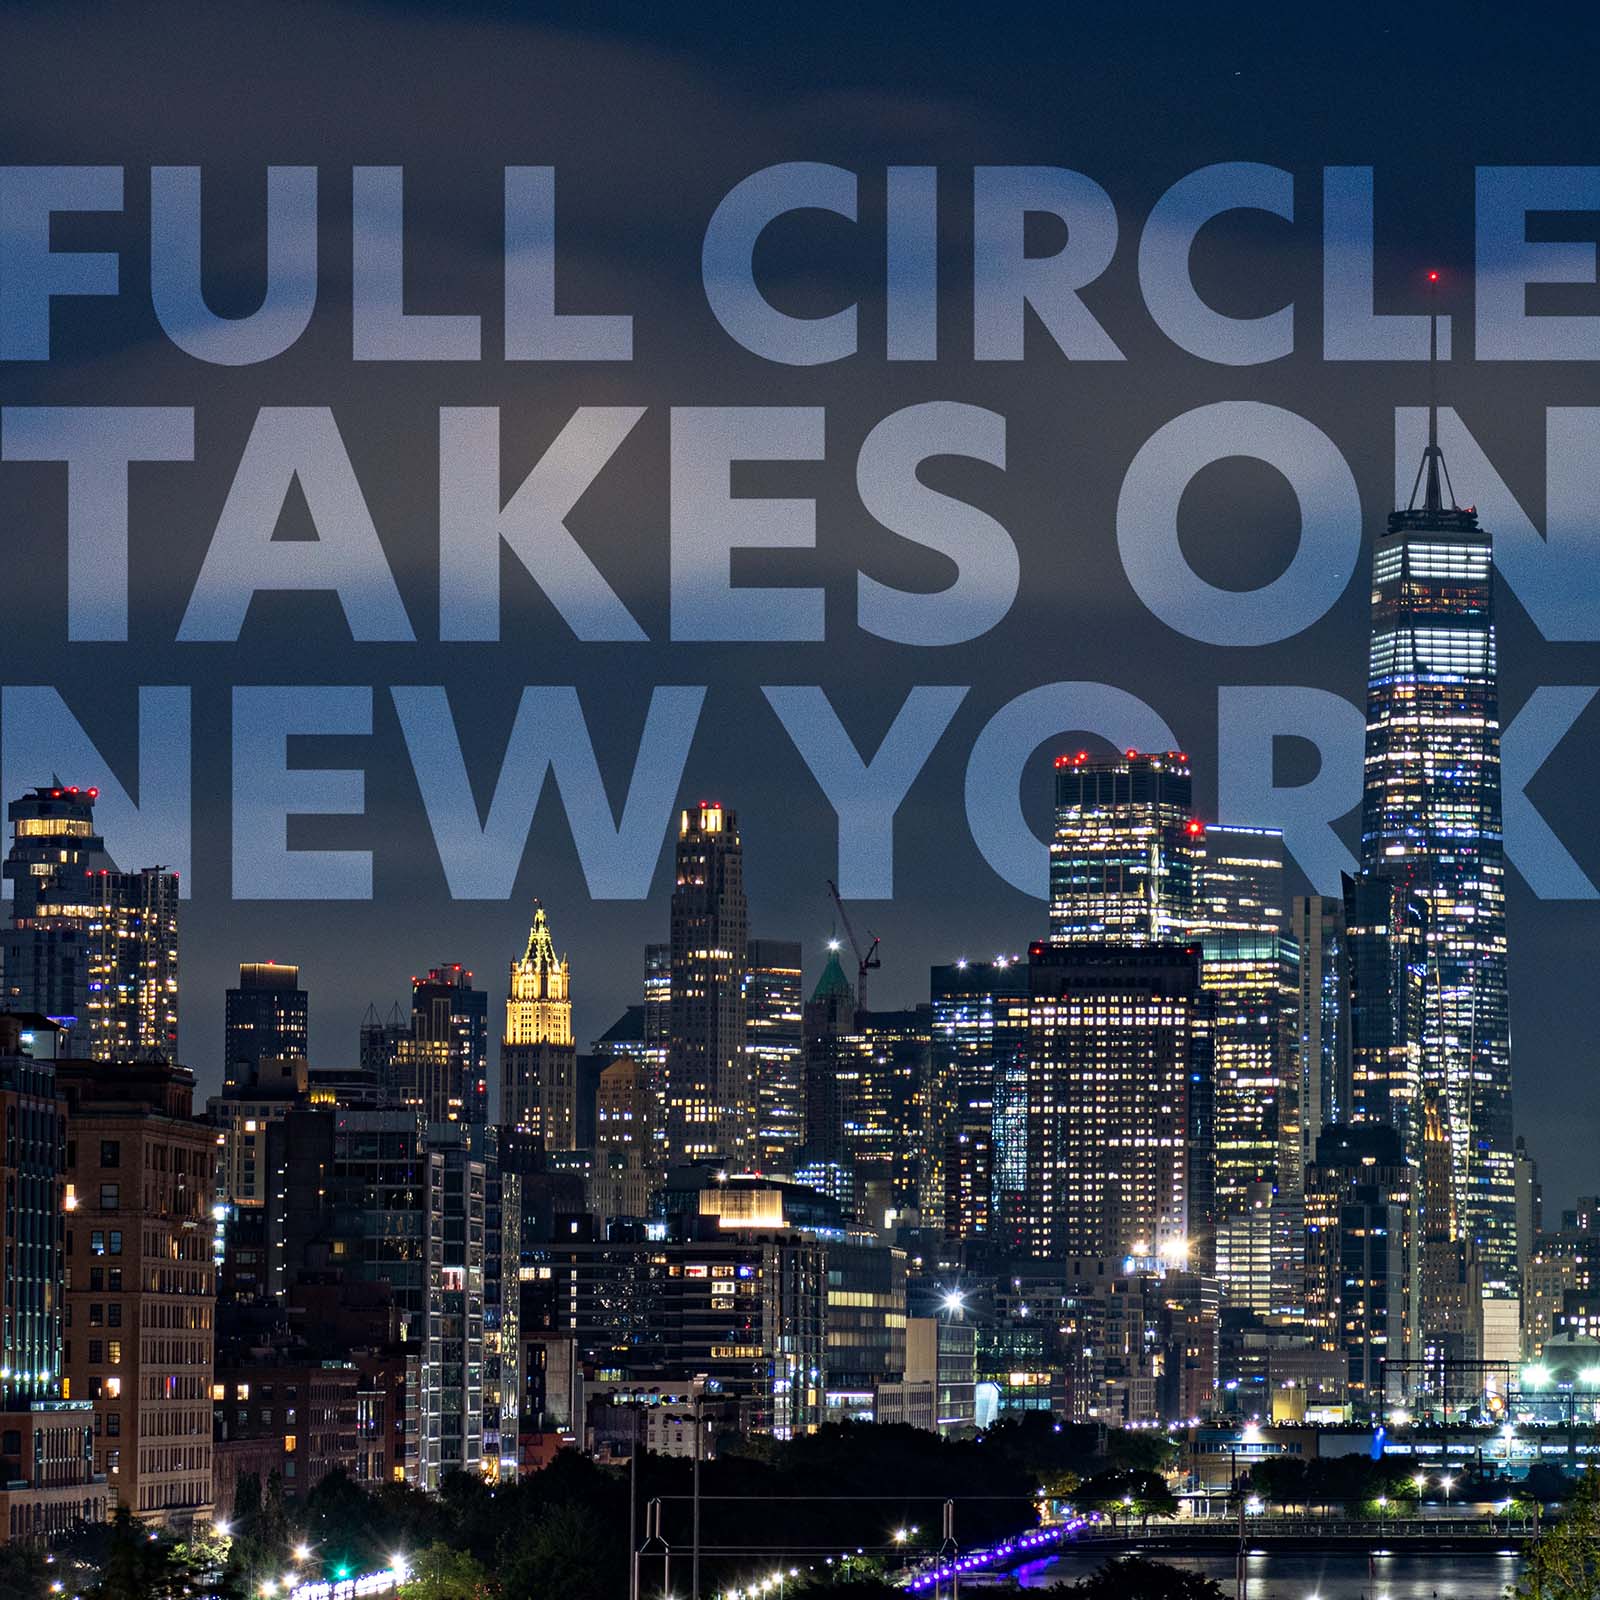 "Full Circle takes on New York" overlapped by NYC buildings